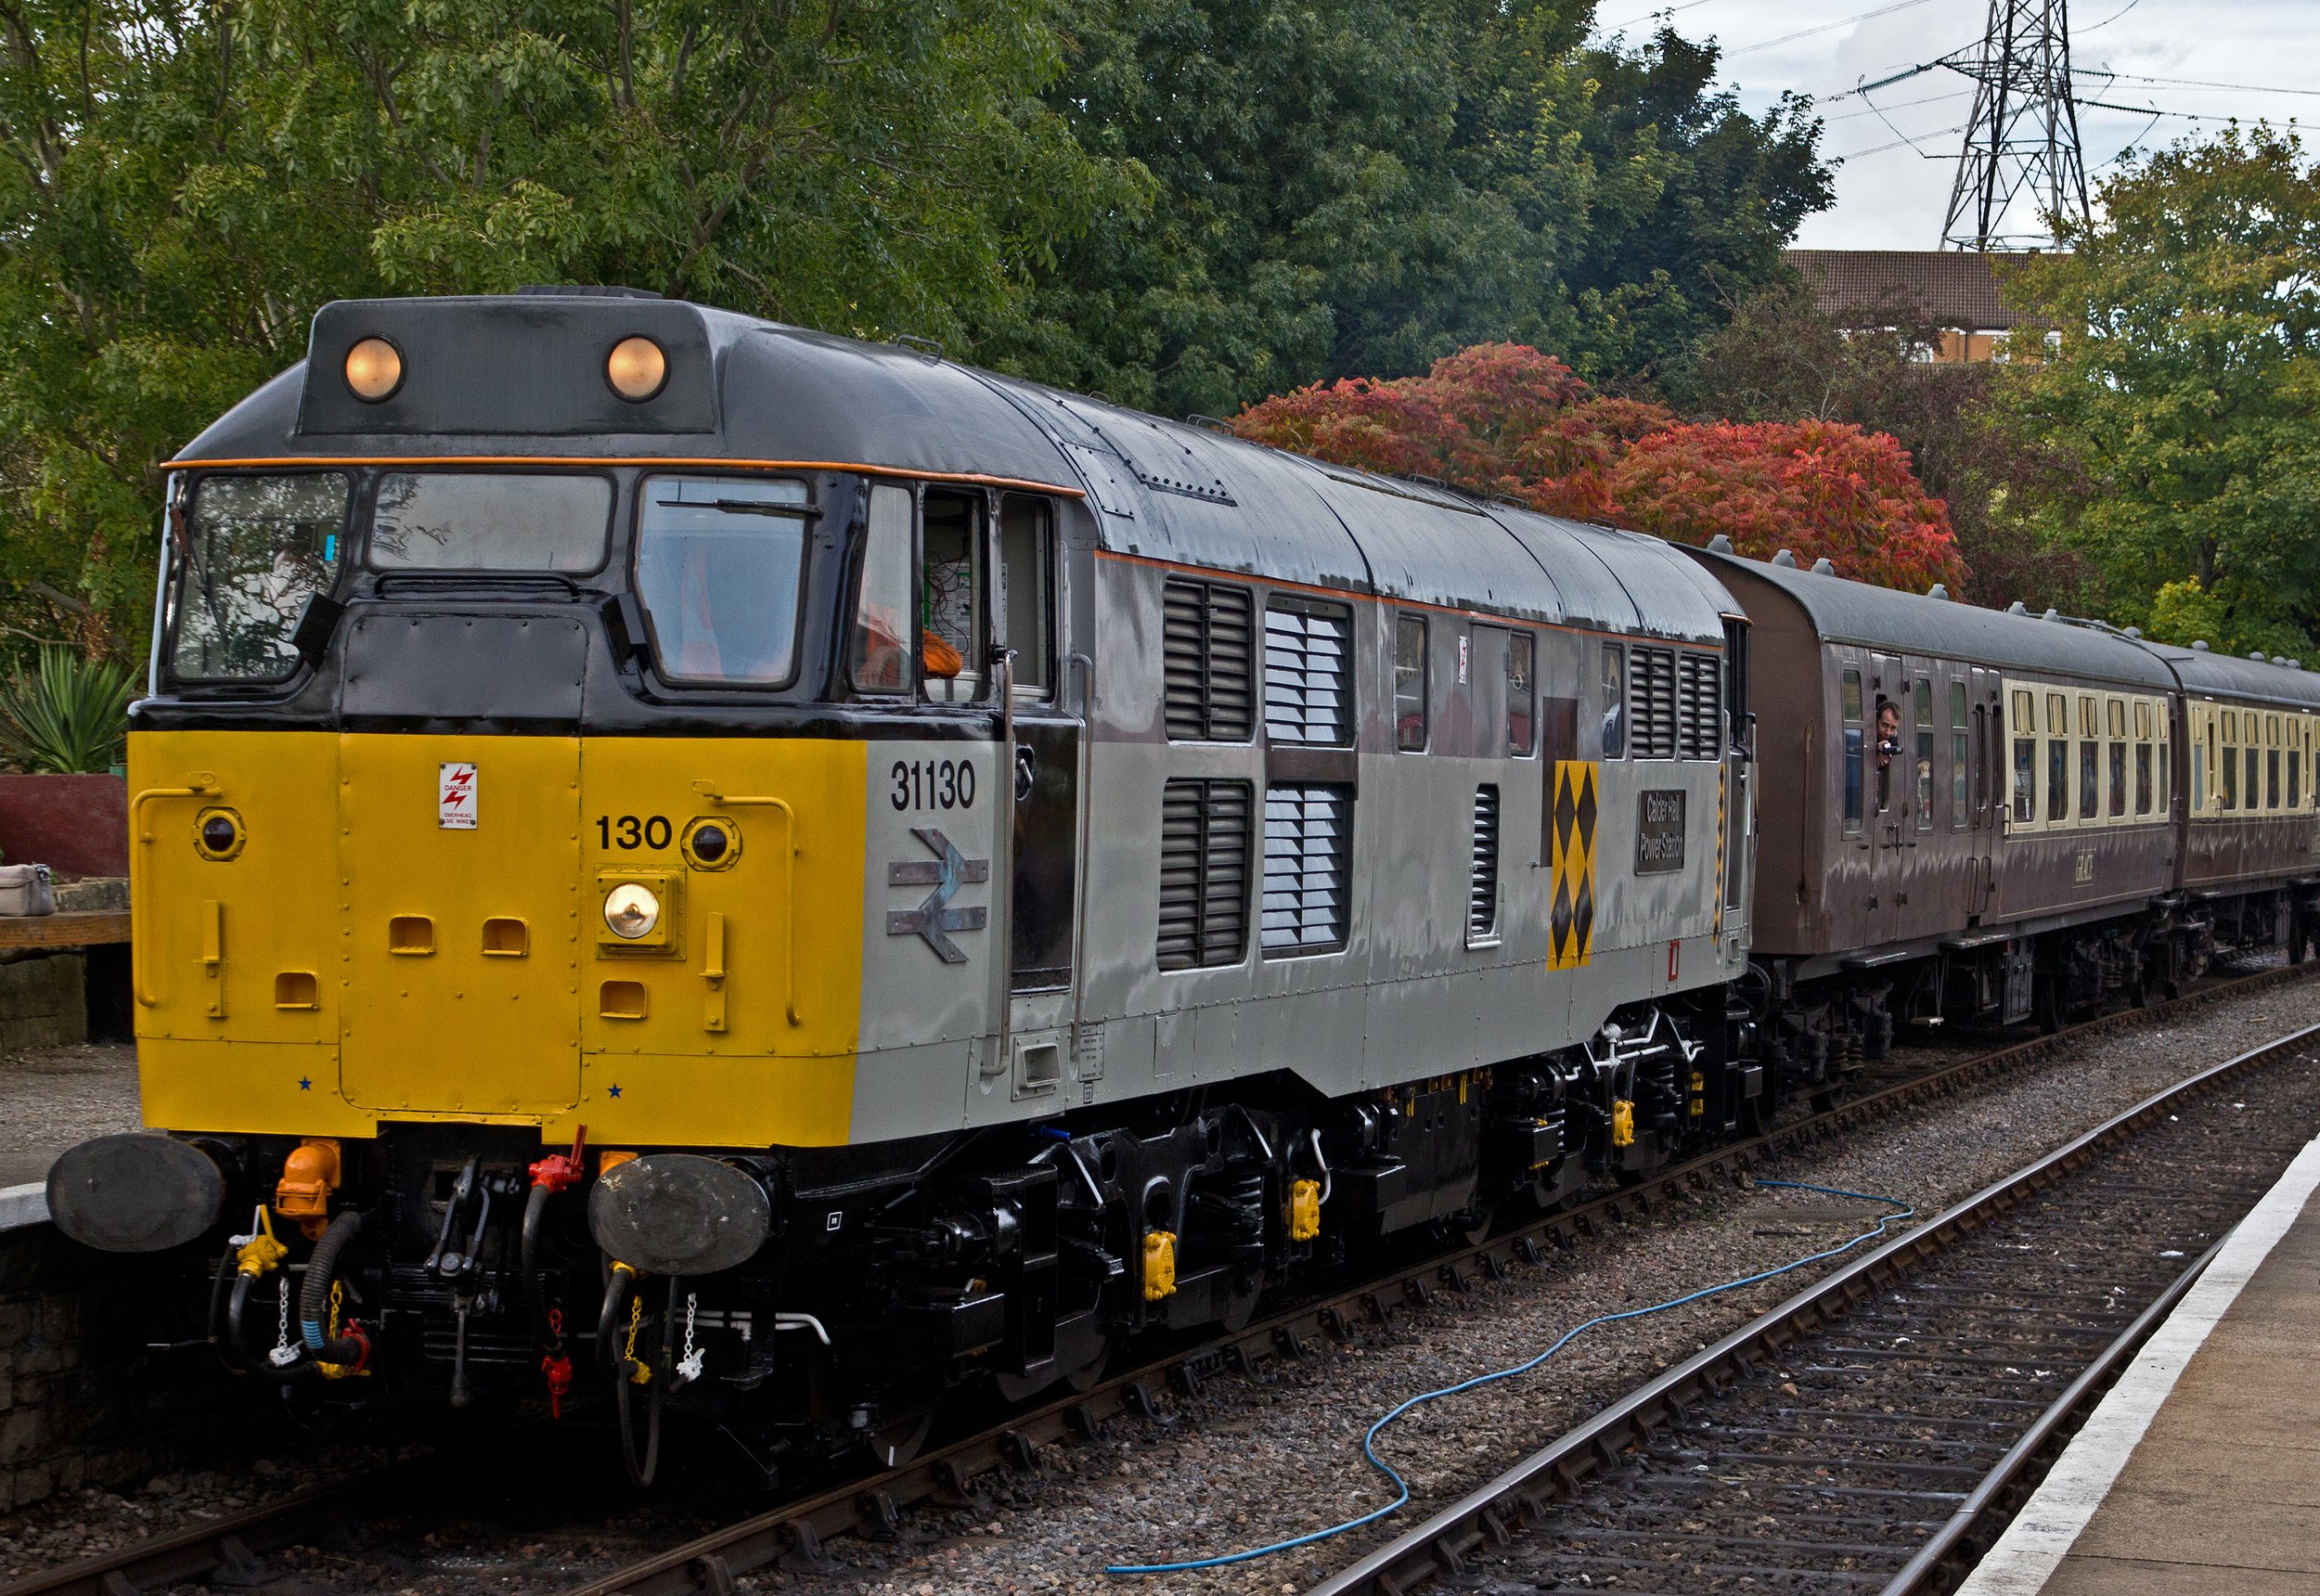  31130 at Bitton in its previous livery during a gala in 2012. (C) Robin Mitchell 